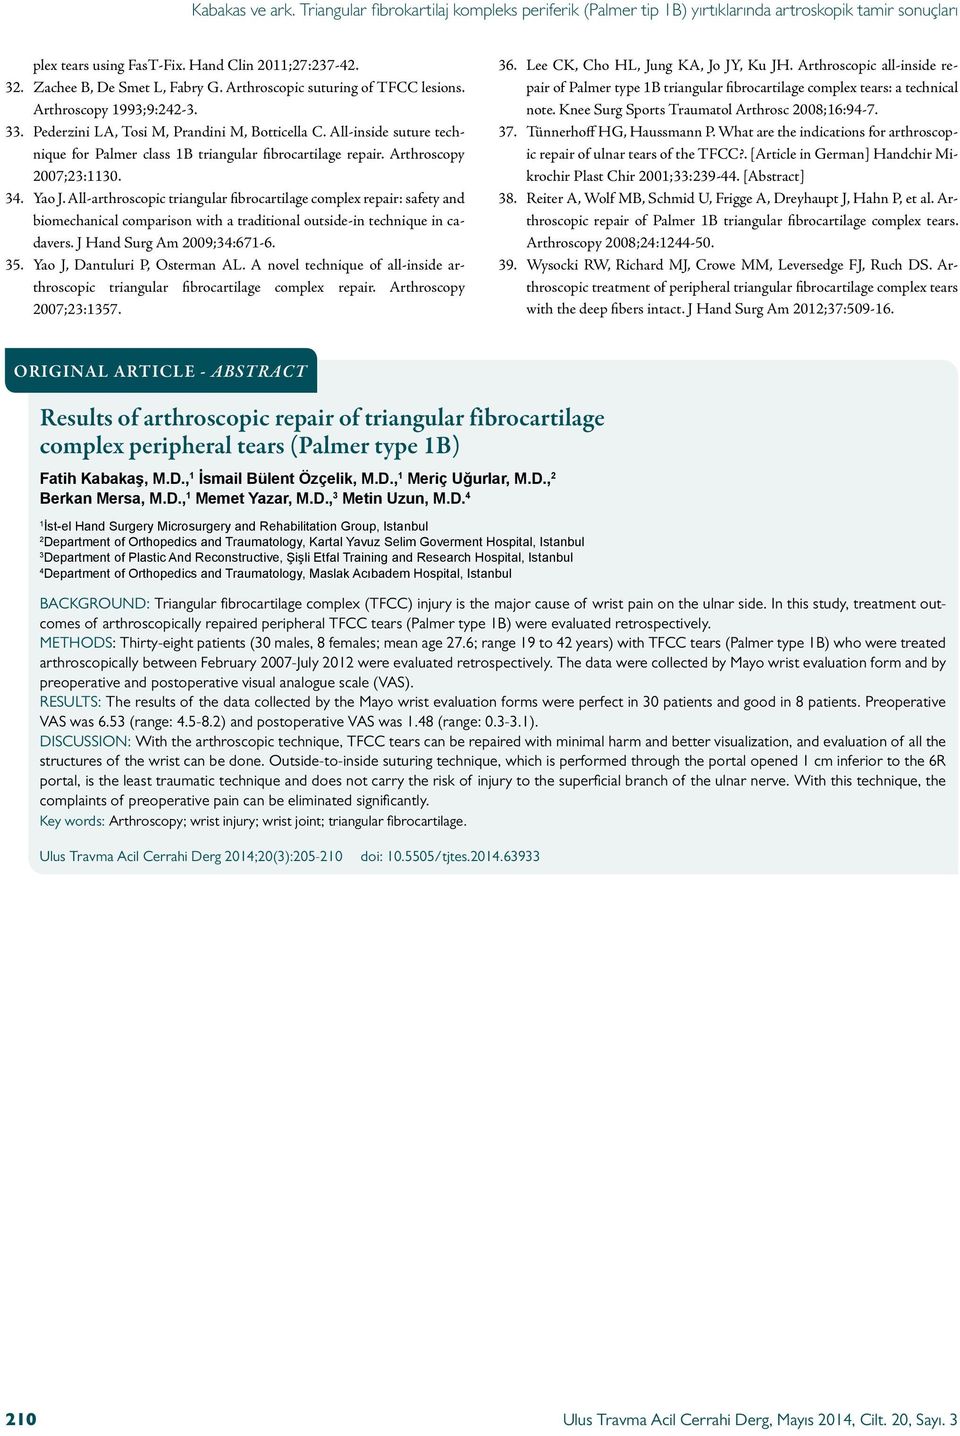 All-arthroscopic triangular fibrocartilage complex repair: safety and biomechanical comparison with a traditional outside-in technique in cadavers. J Hand Surg Am 2009;34:671-6. 35.